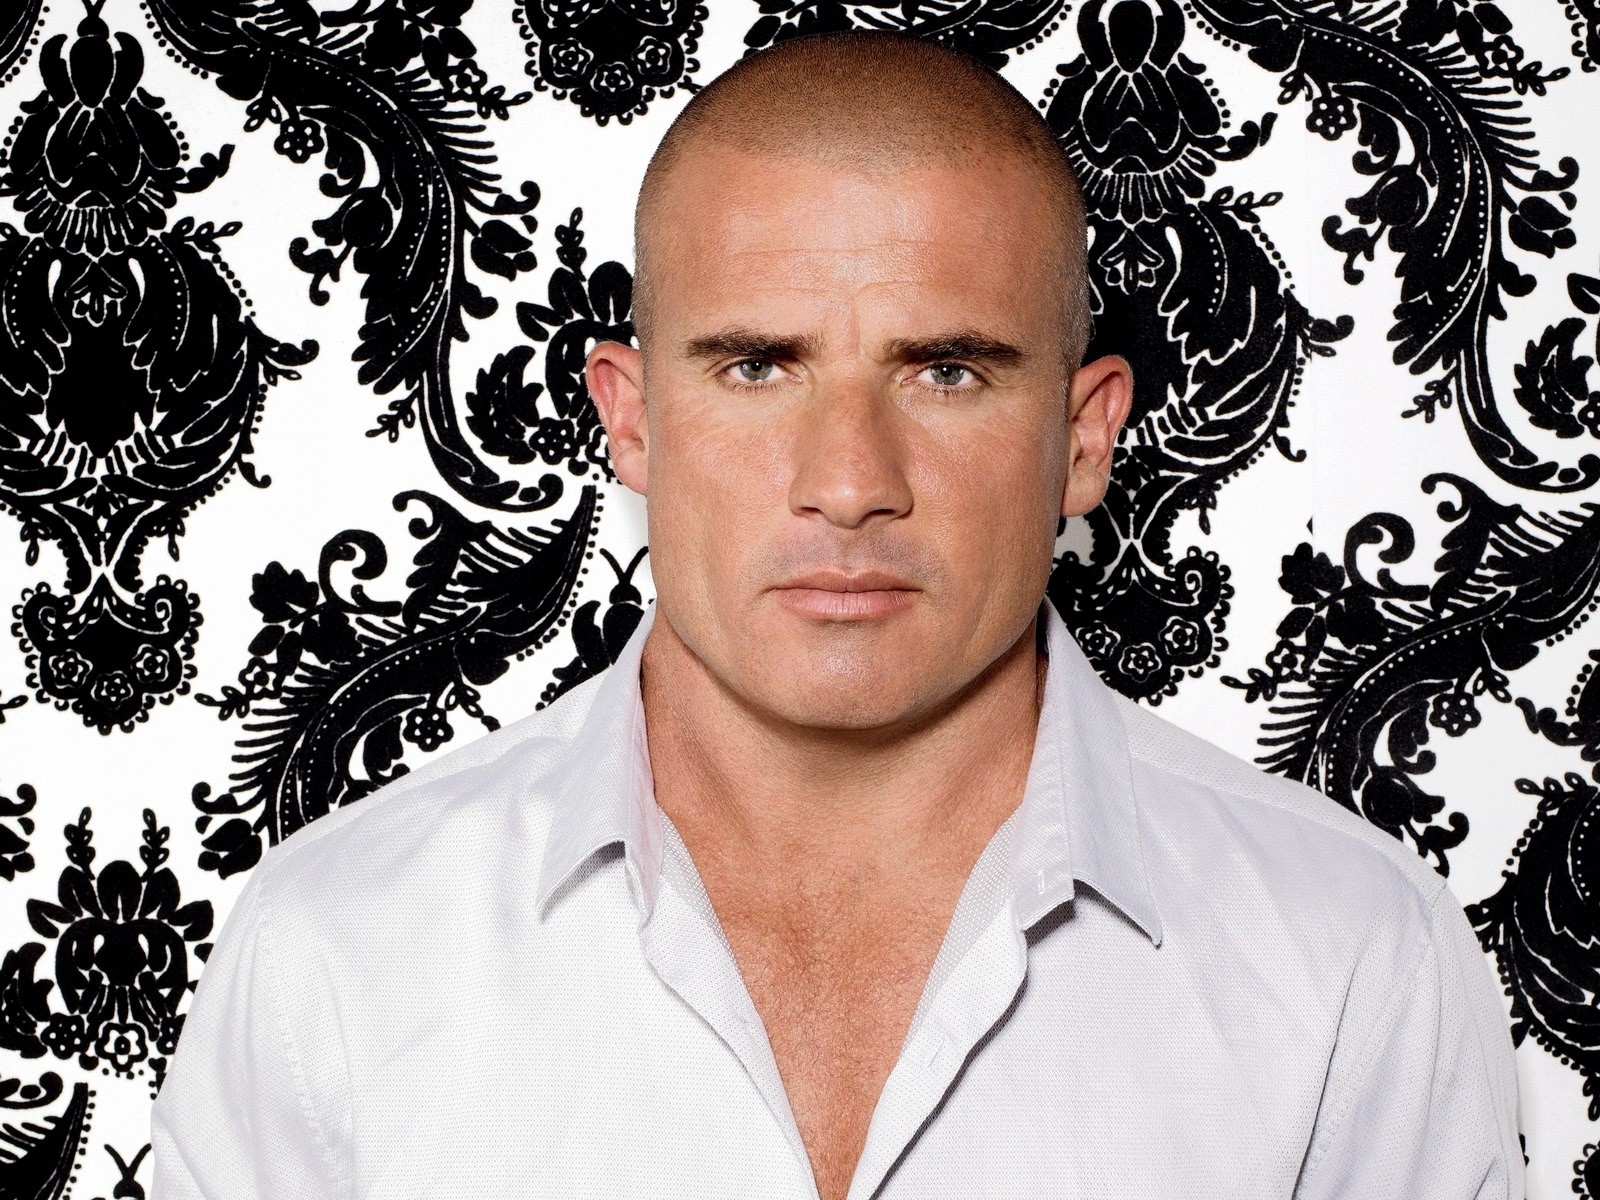 Dominic purcell HD wallpaper, background